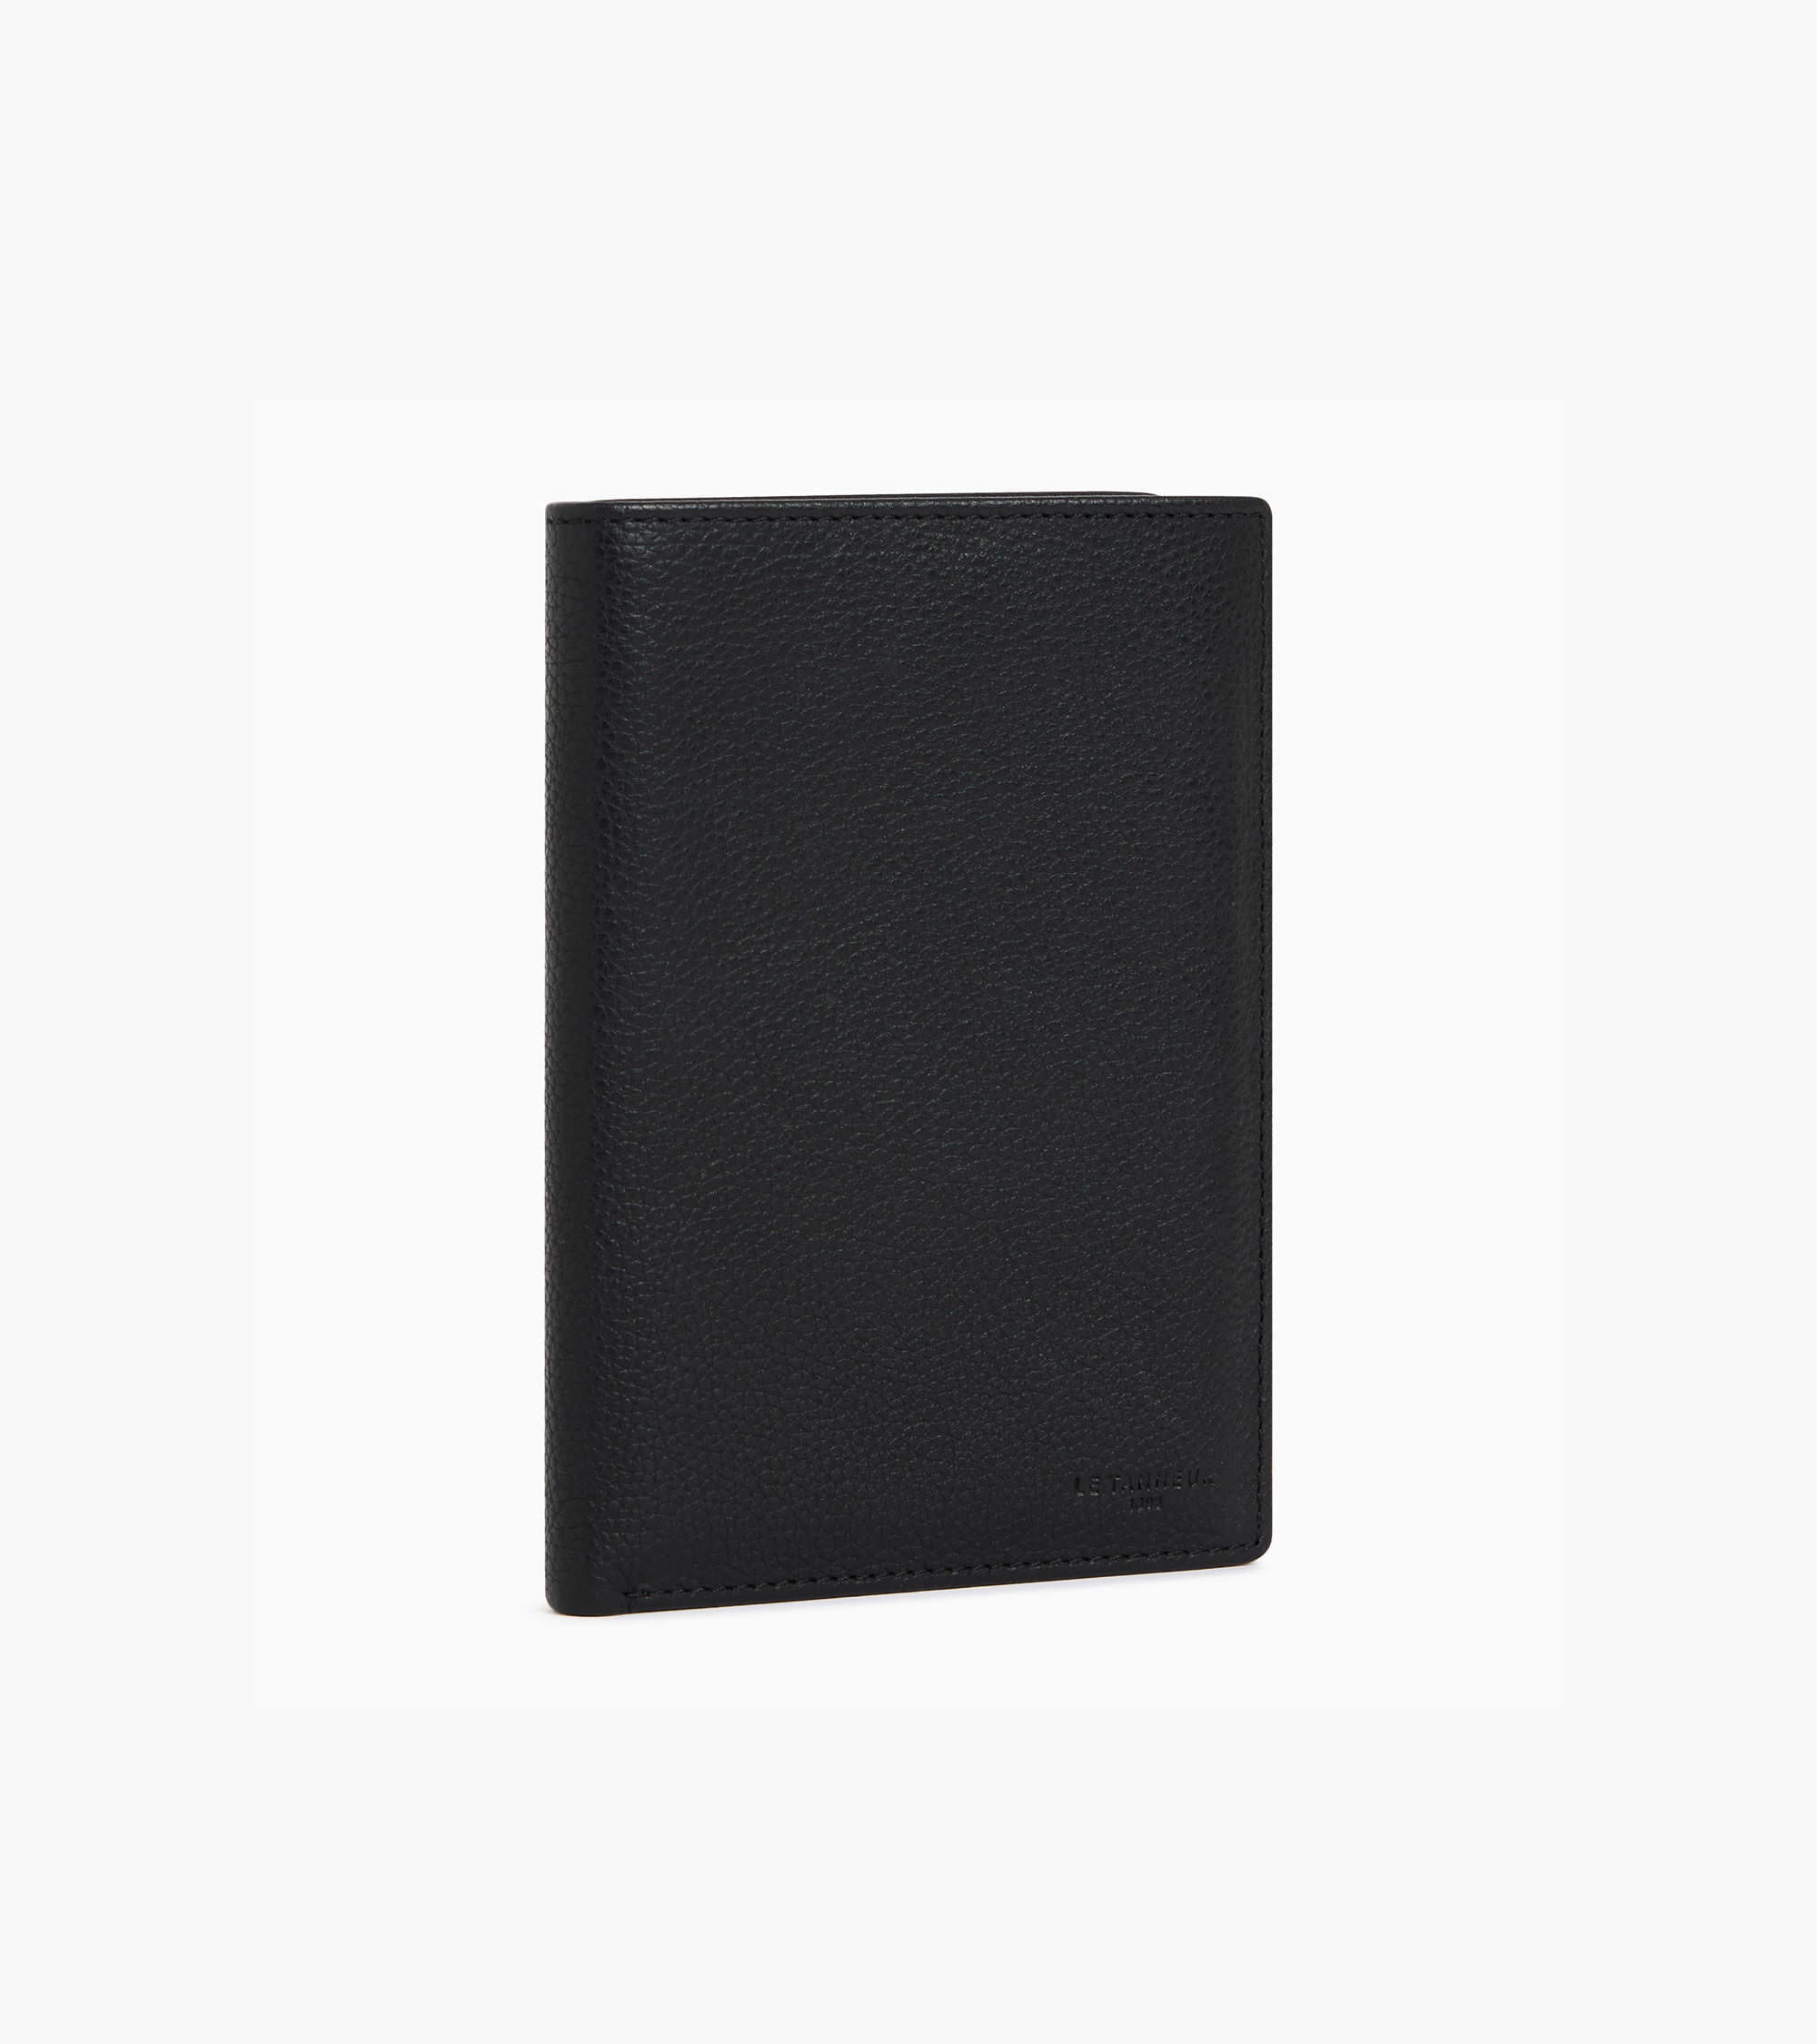 Charles zipped pocket wallet in grained leather